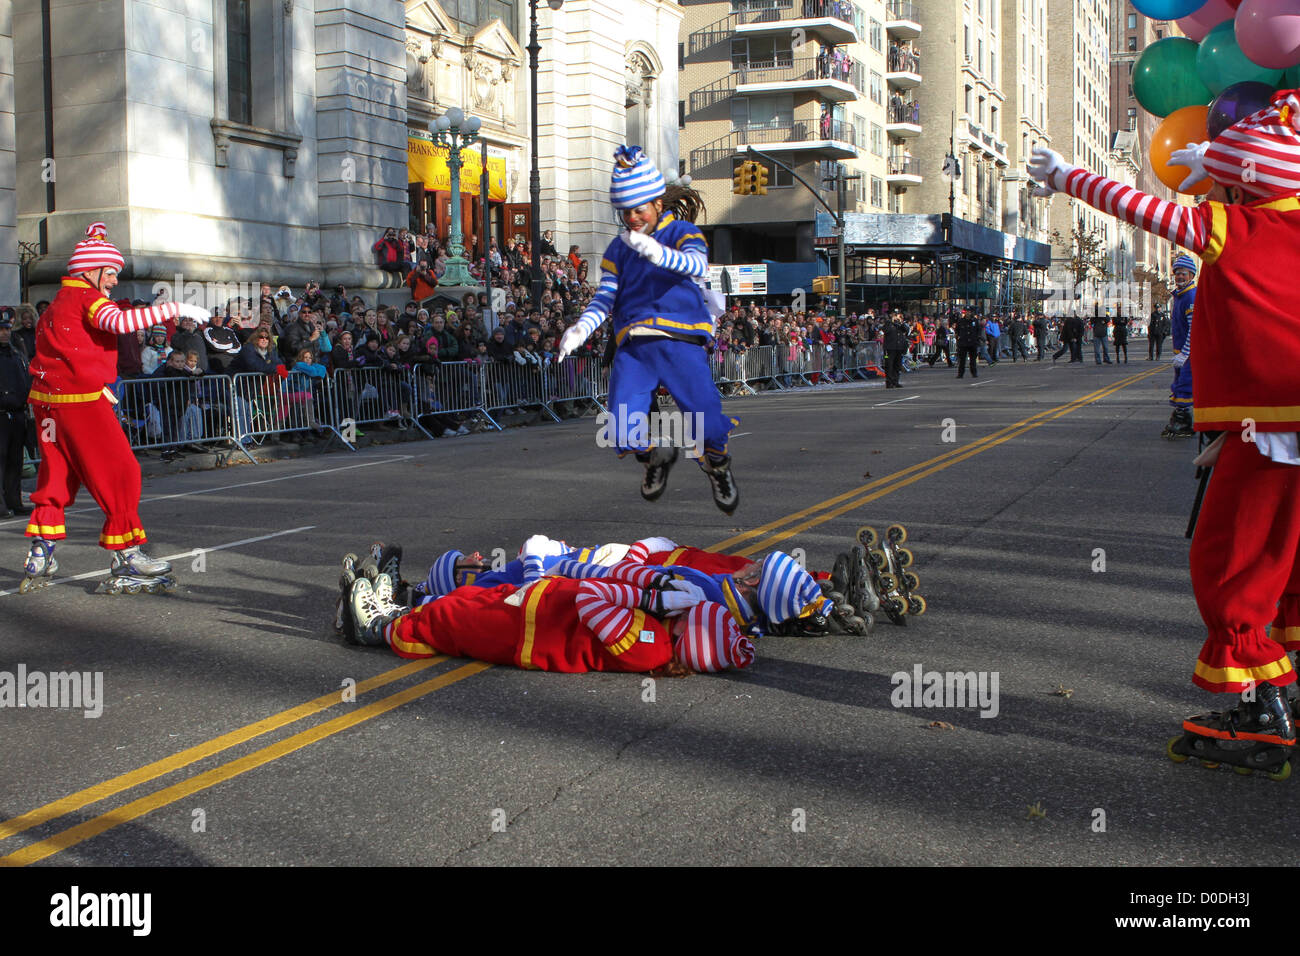 Spectators watch a clown on roller blades jump over other clowns on Central Park West during Macy's Thanksgiving Day Parade in New York City, on Thursday, Nov. 22, 2012. Stock Photo